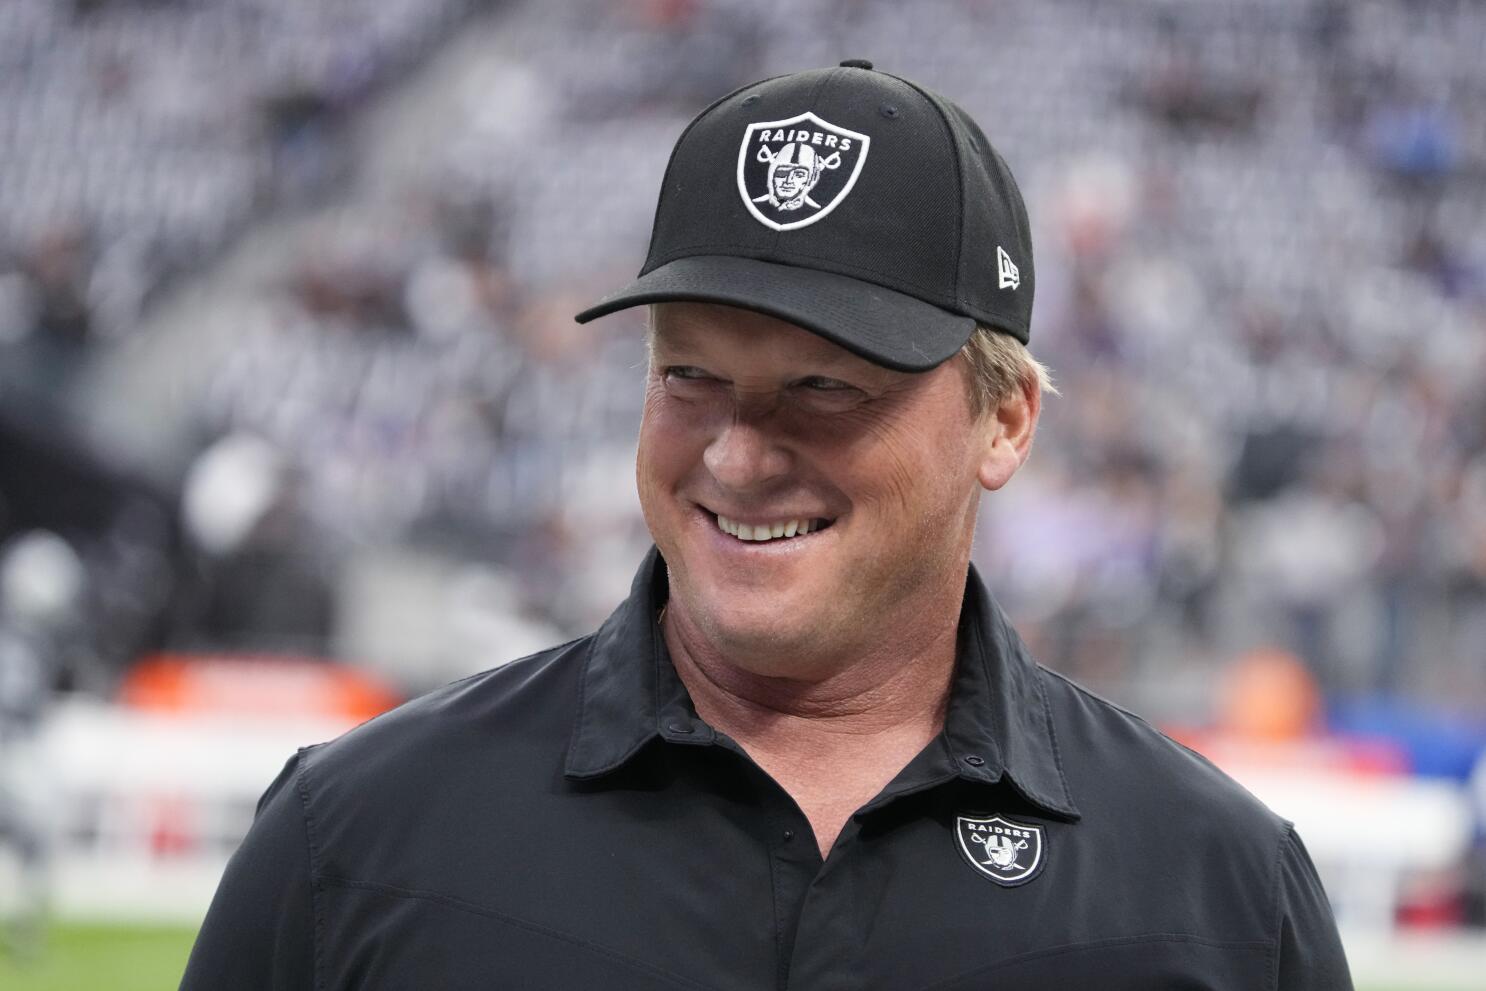 Gruden present for QB Carr's early work with Saints, AP source